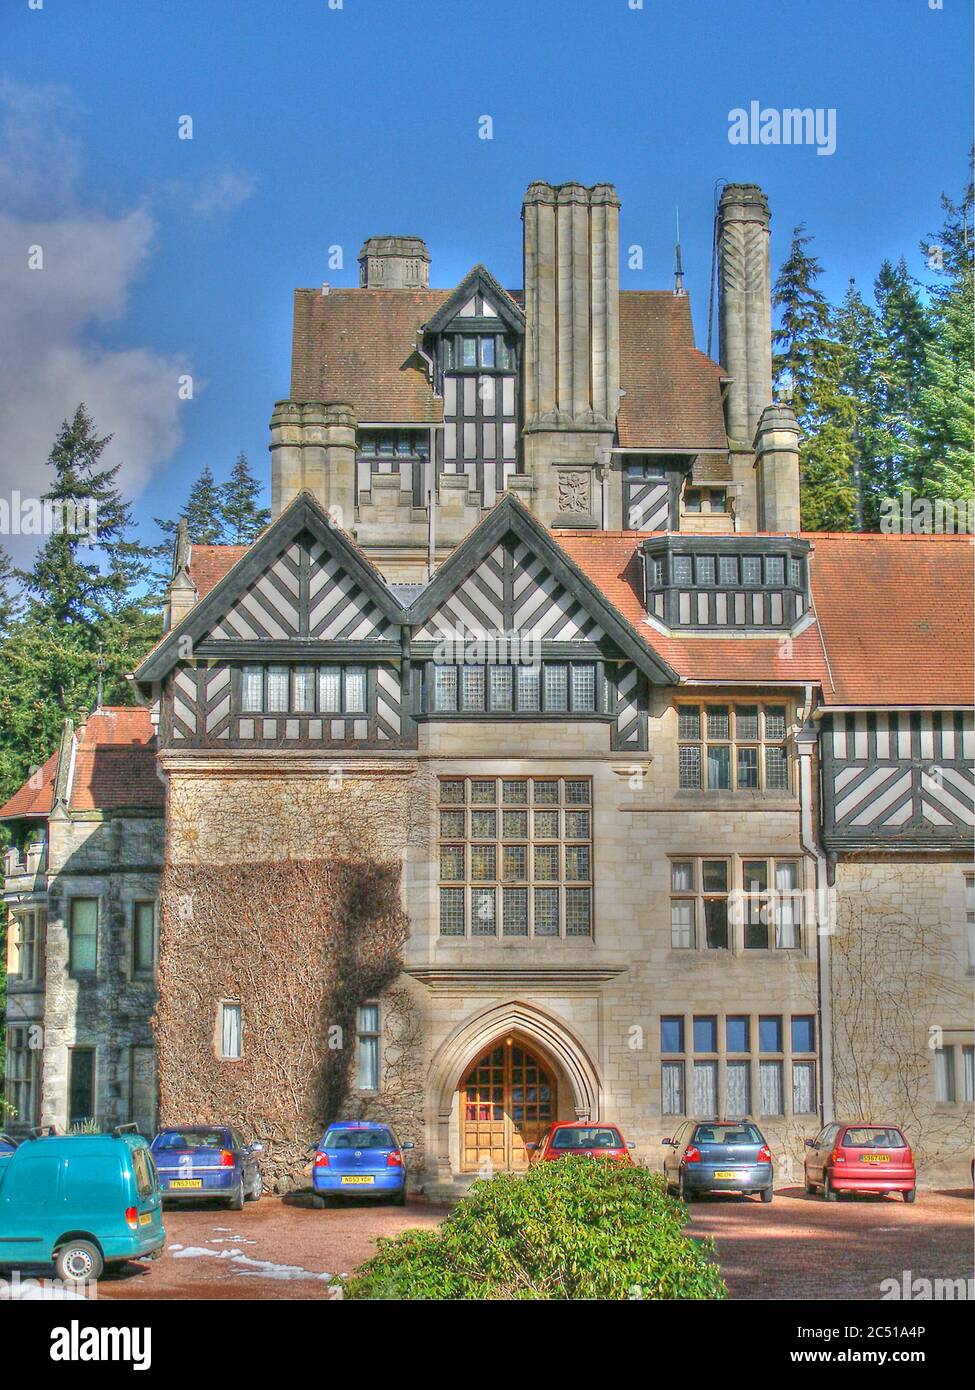 Cragside, das Armstrong-Familienhaus in Rothbury, Northumberland. Stockfoto